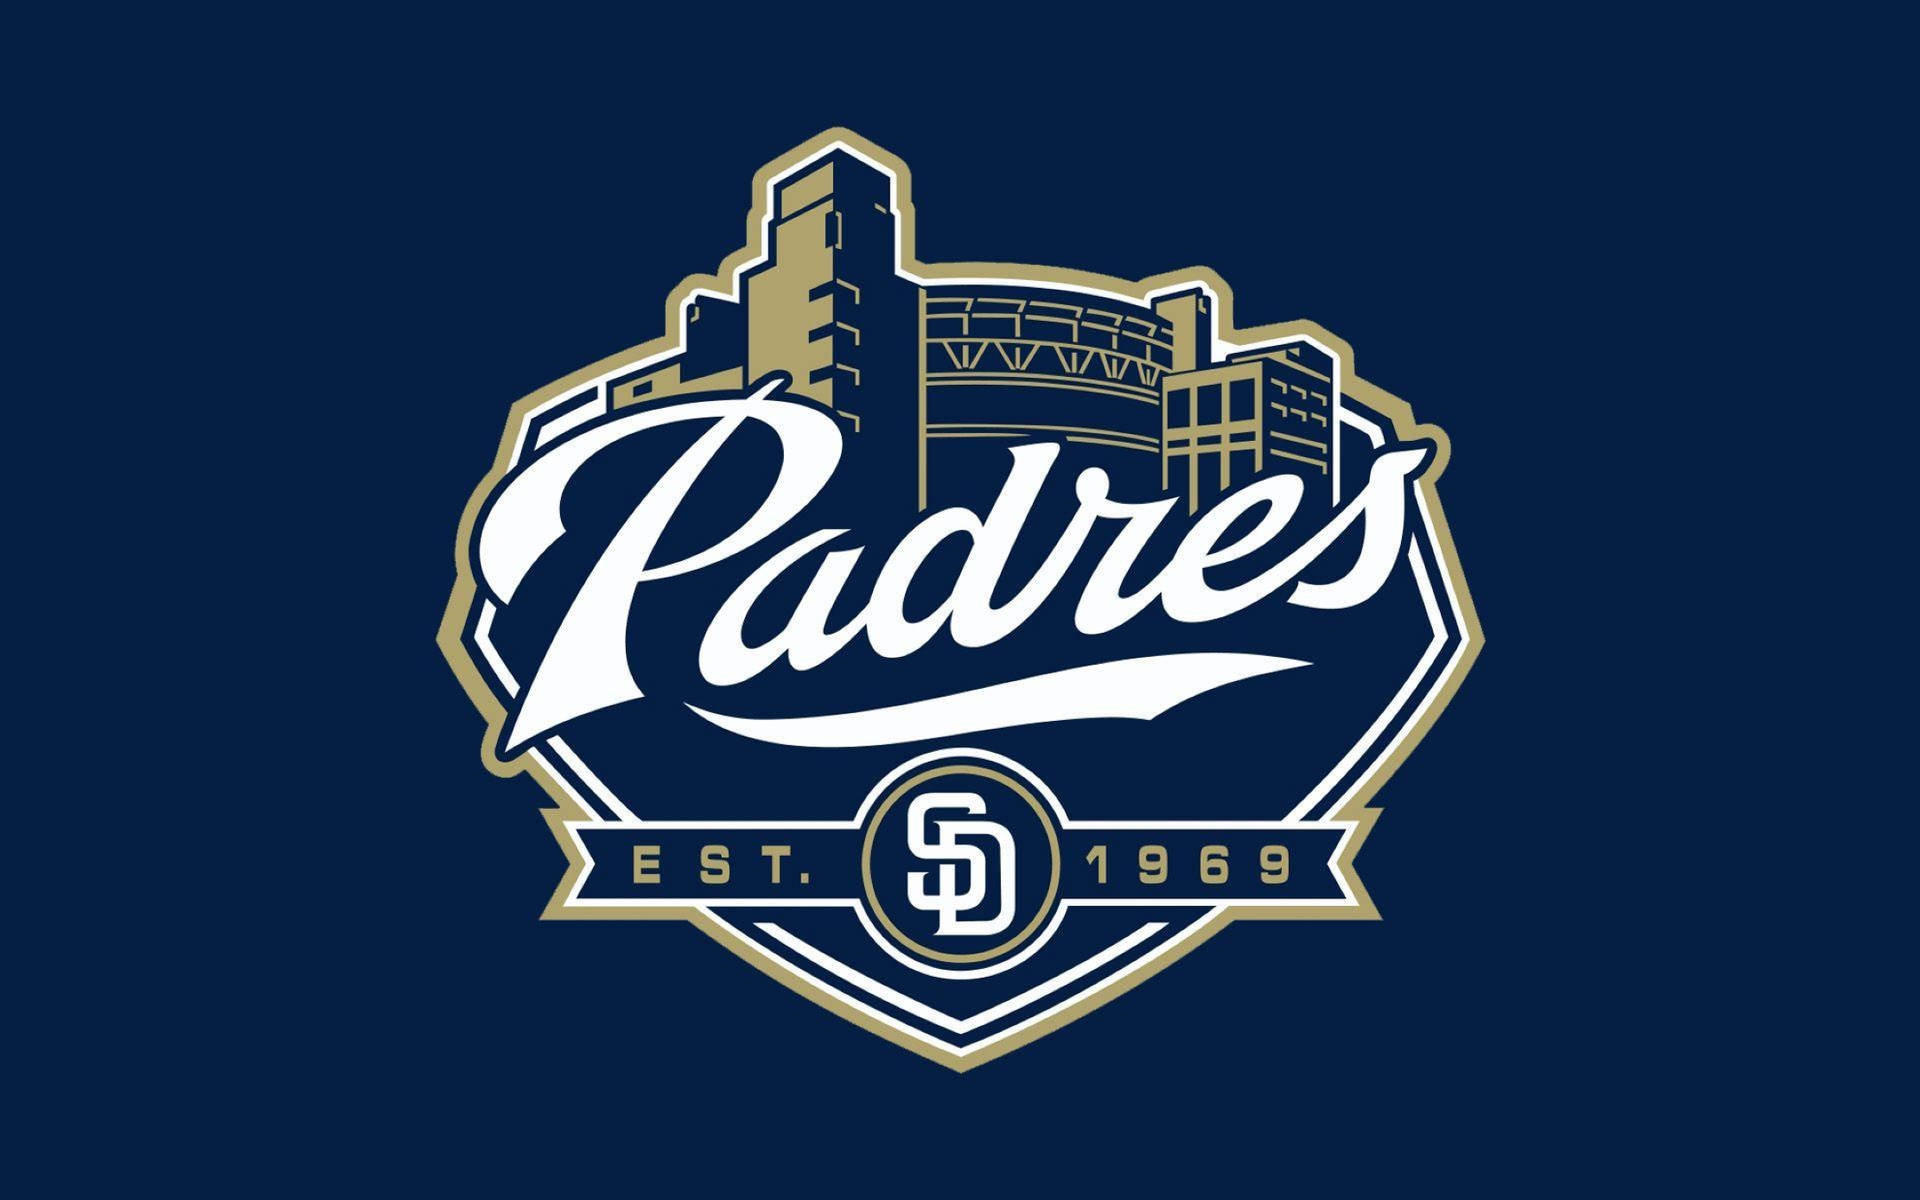 100+] San Diego Padres Background s